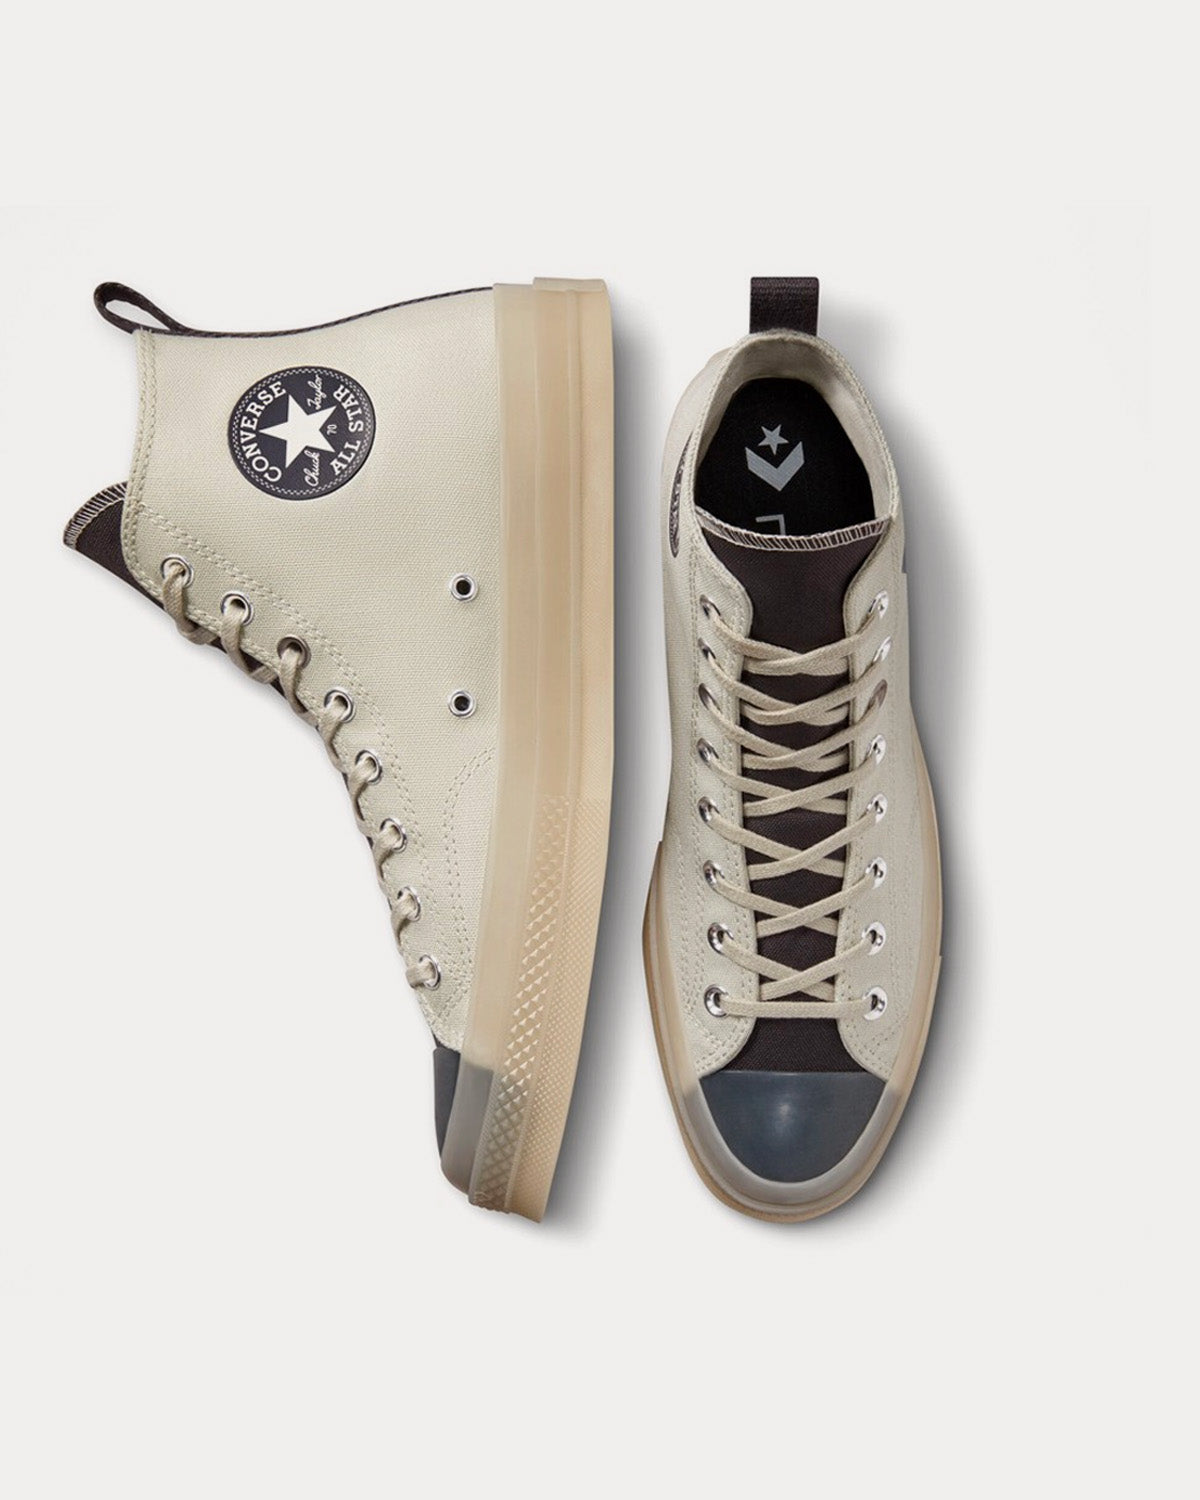 Converse x A-COLD-WALL* - Chuck 70 Silver Birch / Pavement High Top Sneakers